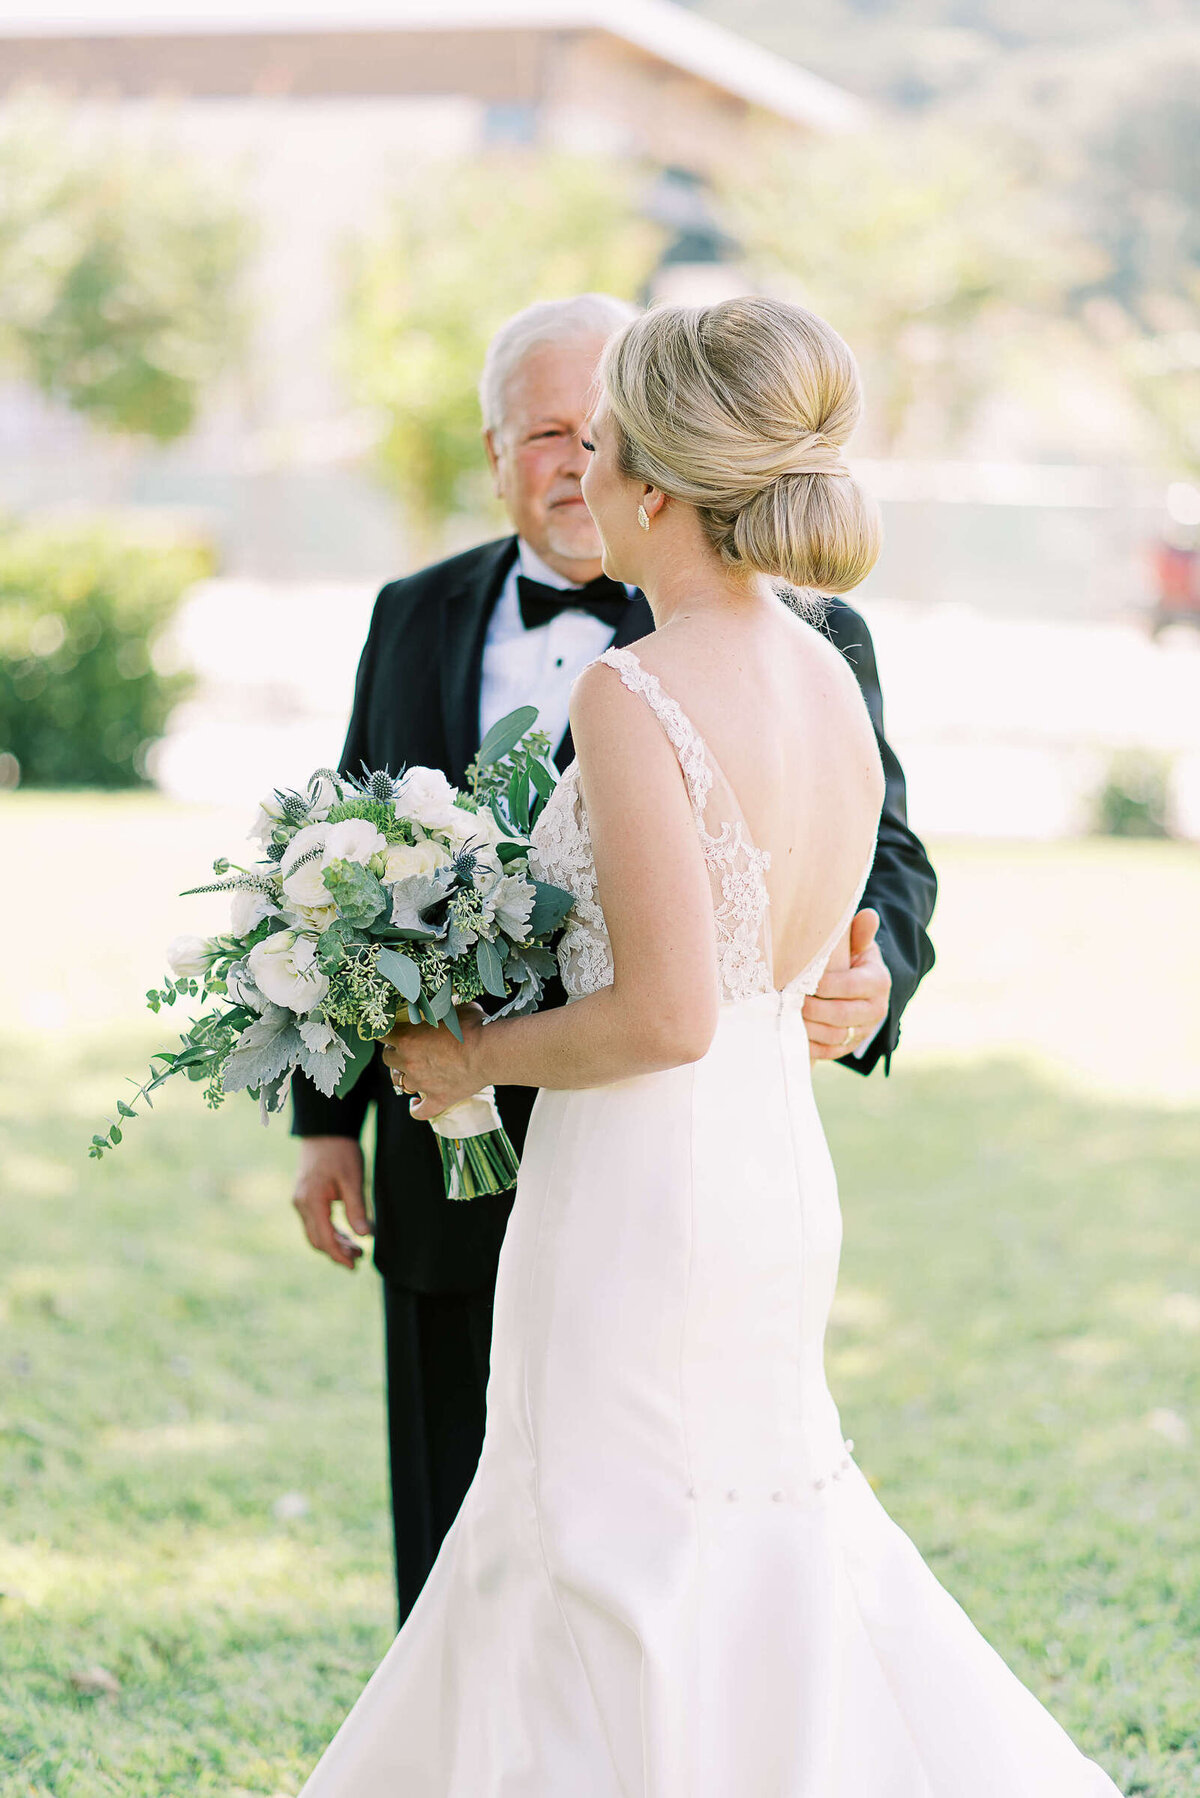 Bride and her father talk before walking down the aisle